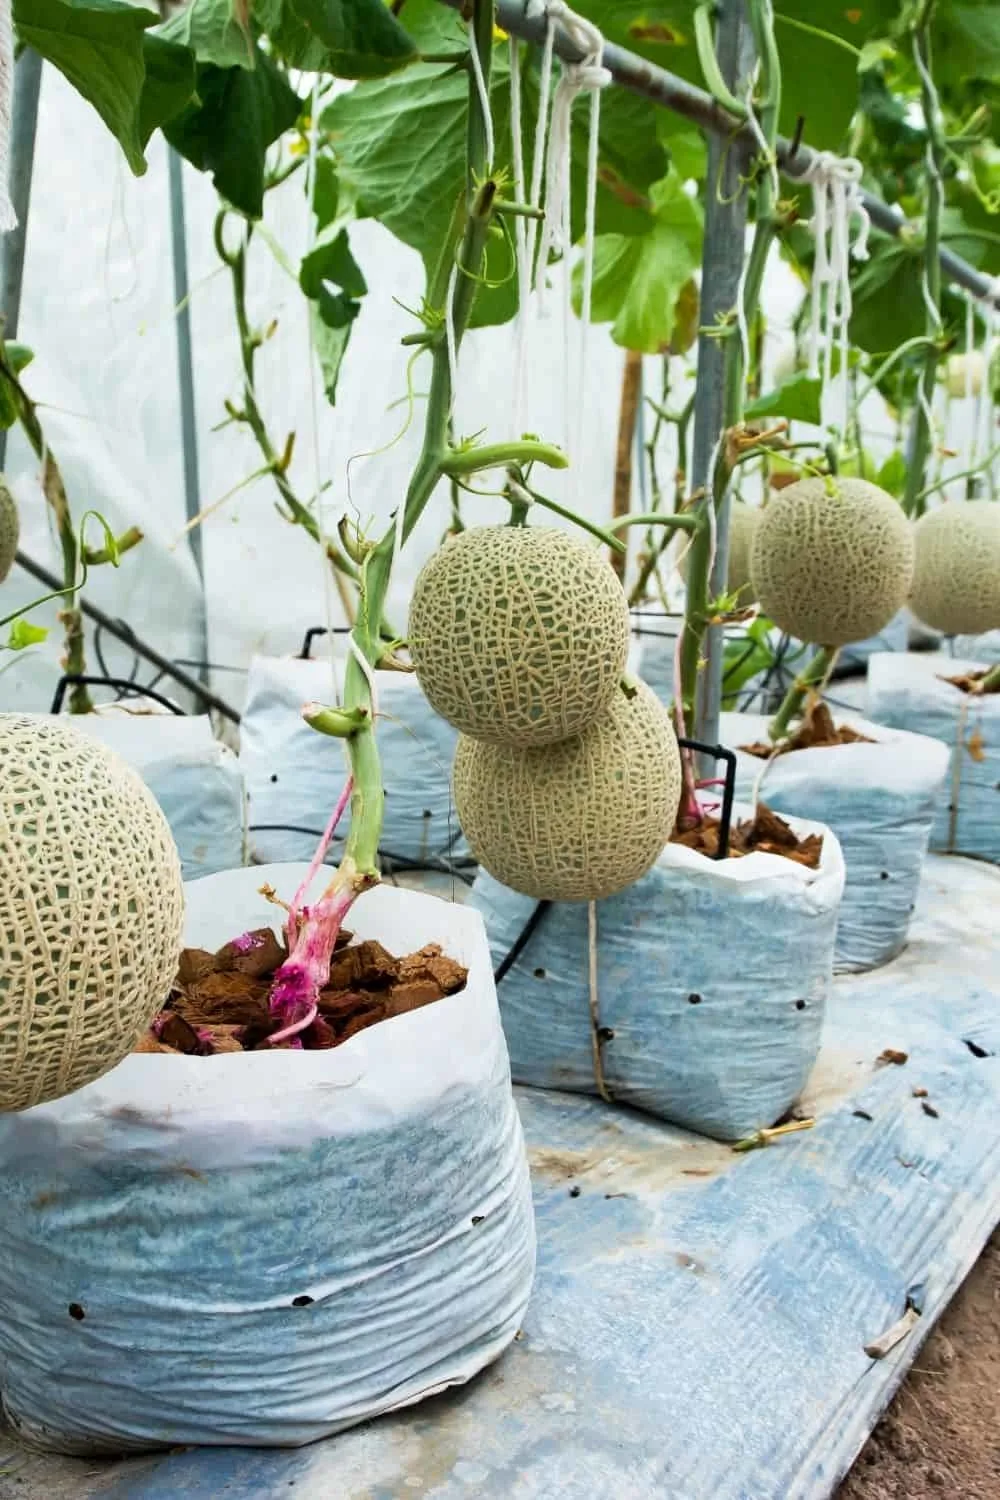 Cantaloupes trained to grow vertically